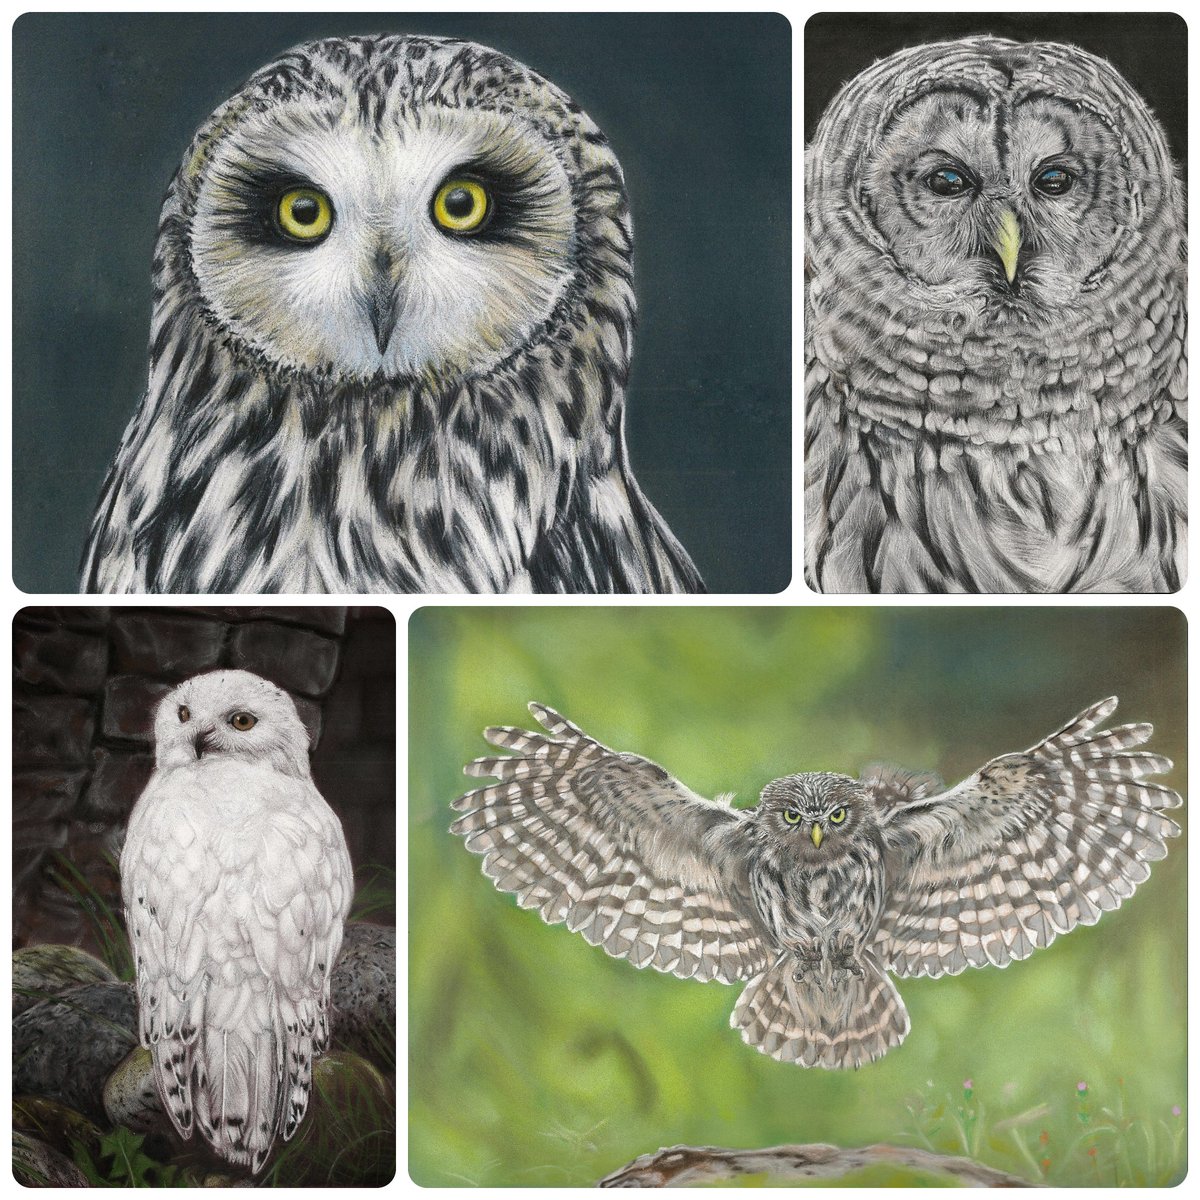 So, apparently I only ever made 4 owl drawings 🤔and not a single one with orange eyes. I took the reference used for the snowy owl, the other references are by Dorothy Thomson and wildliferefencephotos.com.

#asioflammeus #strixvaria #buboscandiacus #athenenoctua